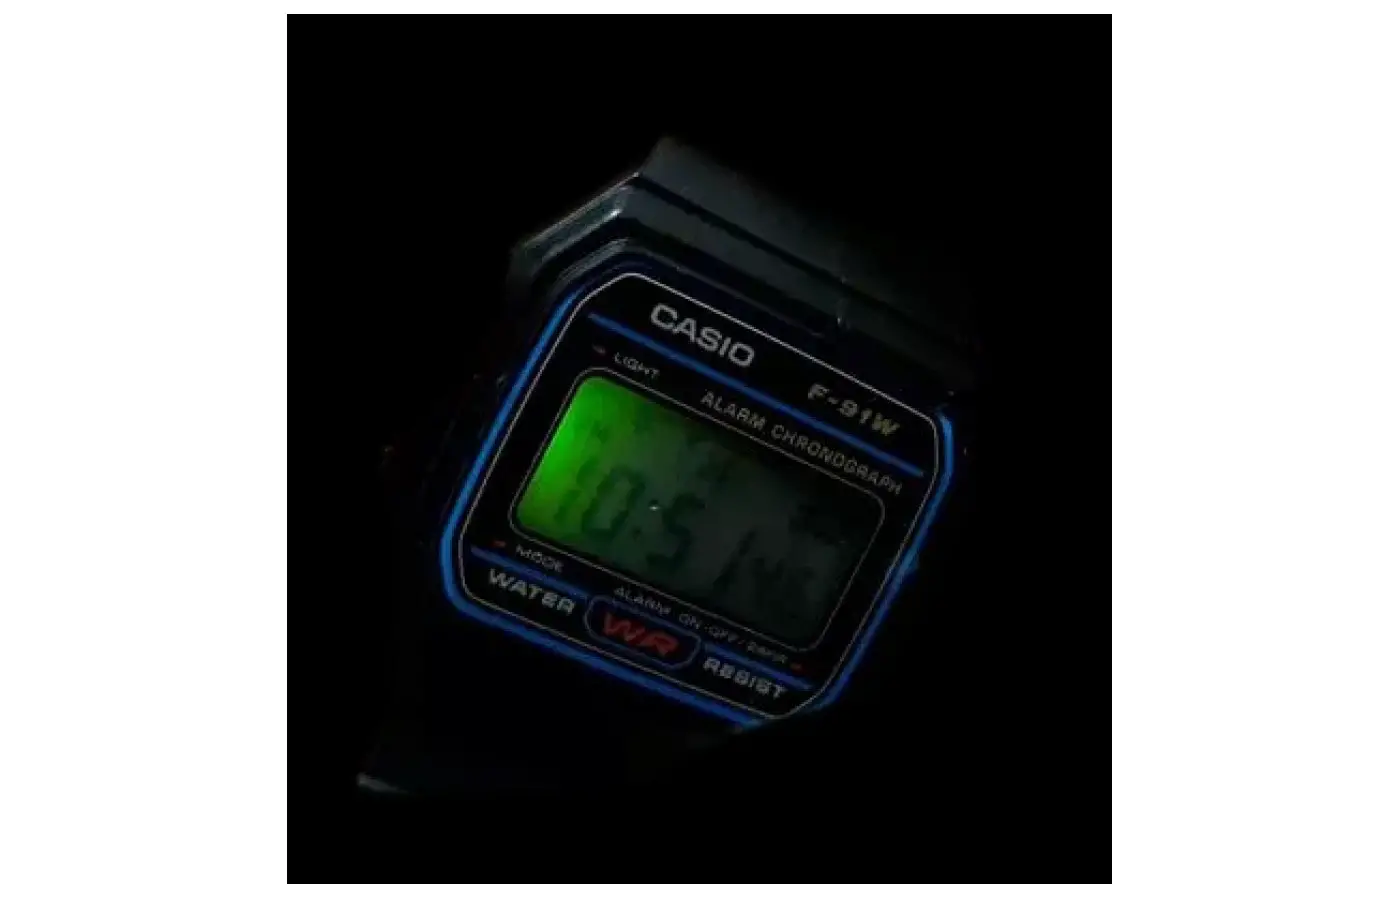 An old school watch light is what Casio uses.